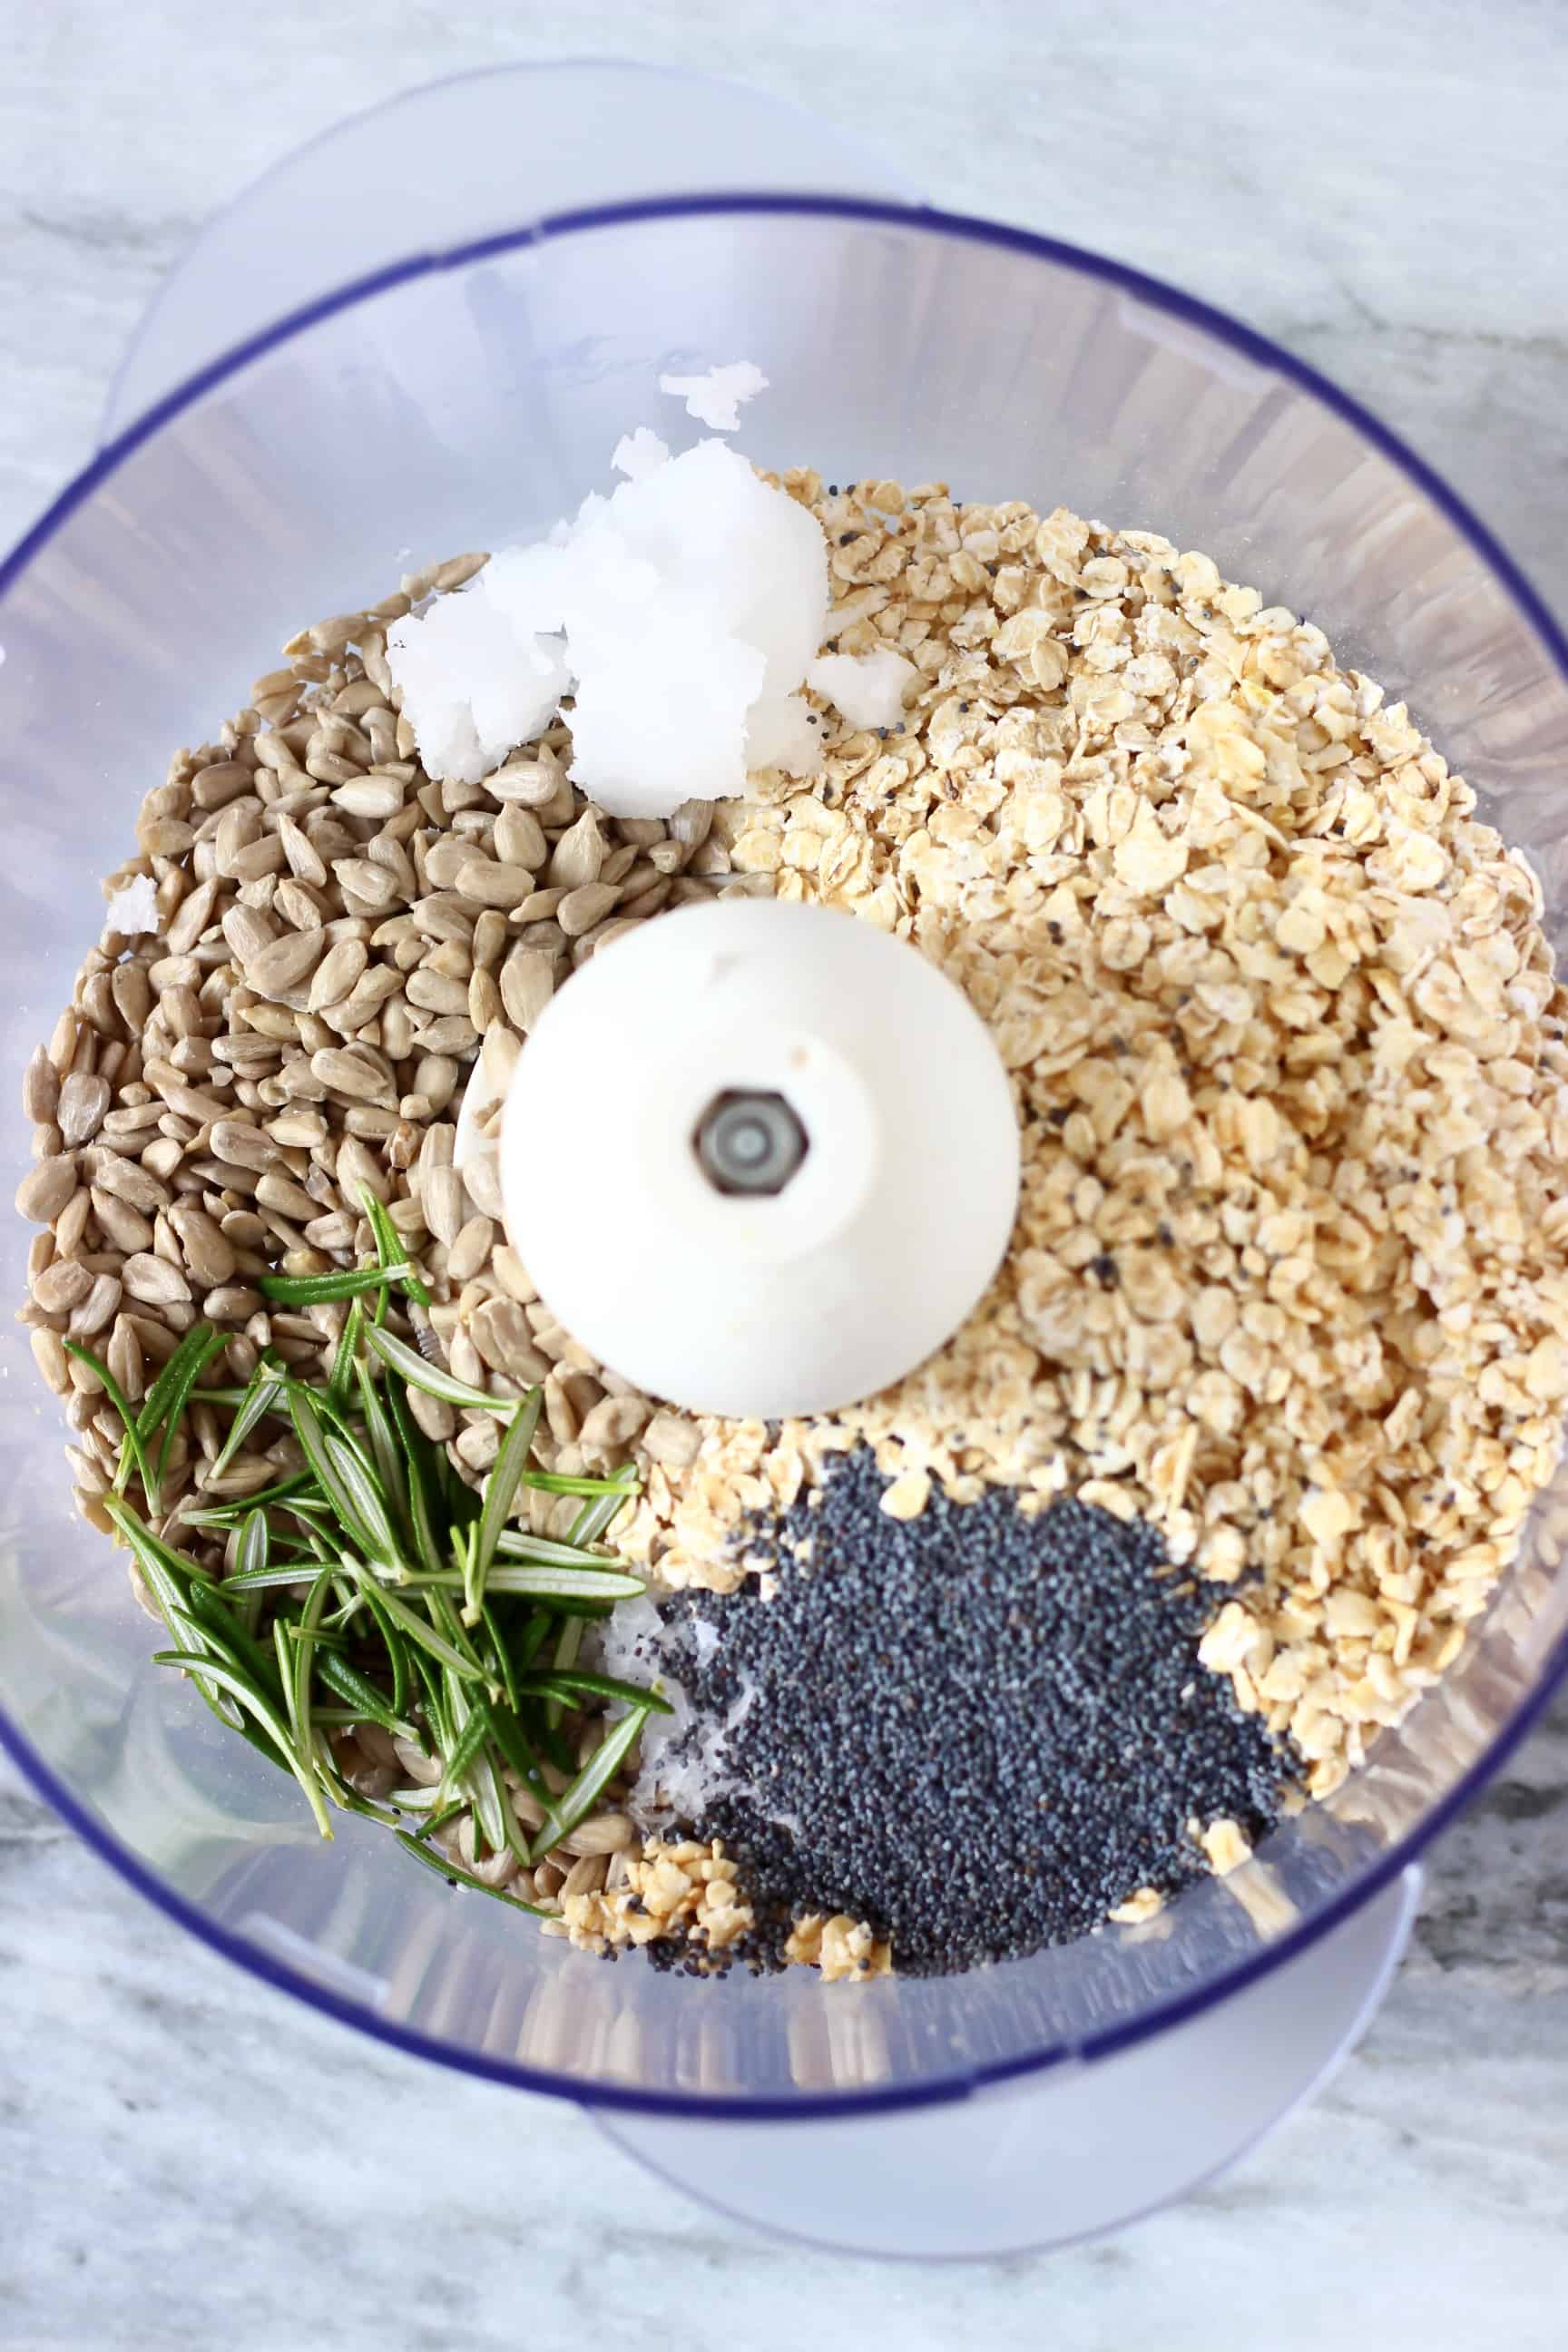 Oats, sunflower seeds, rosemary, poppy seeds, coconut oil and salt in a food processor